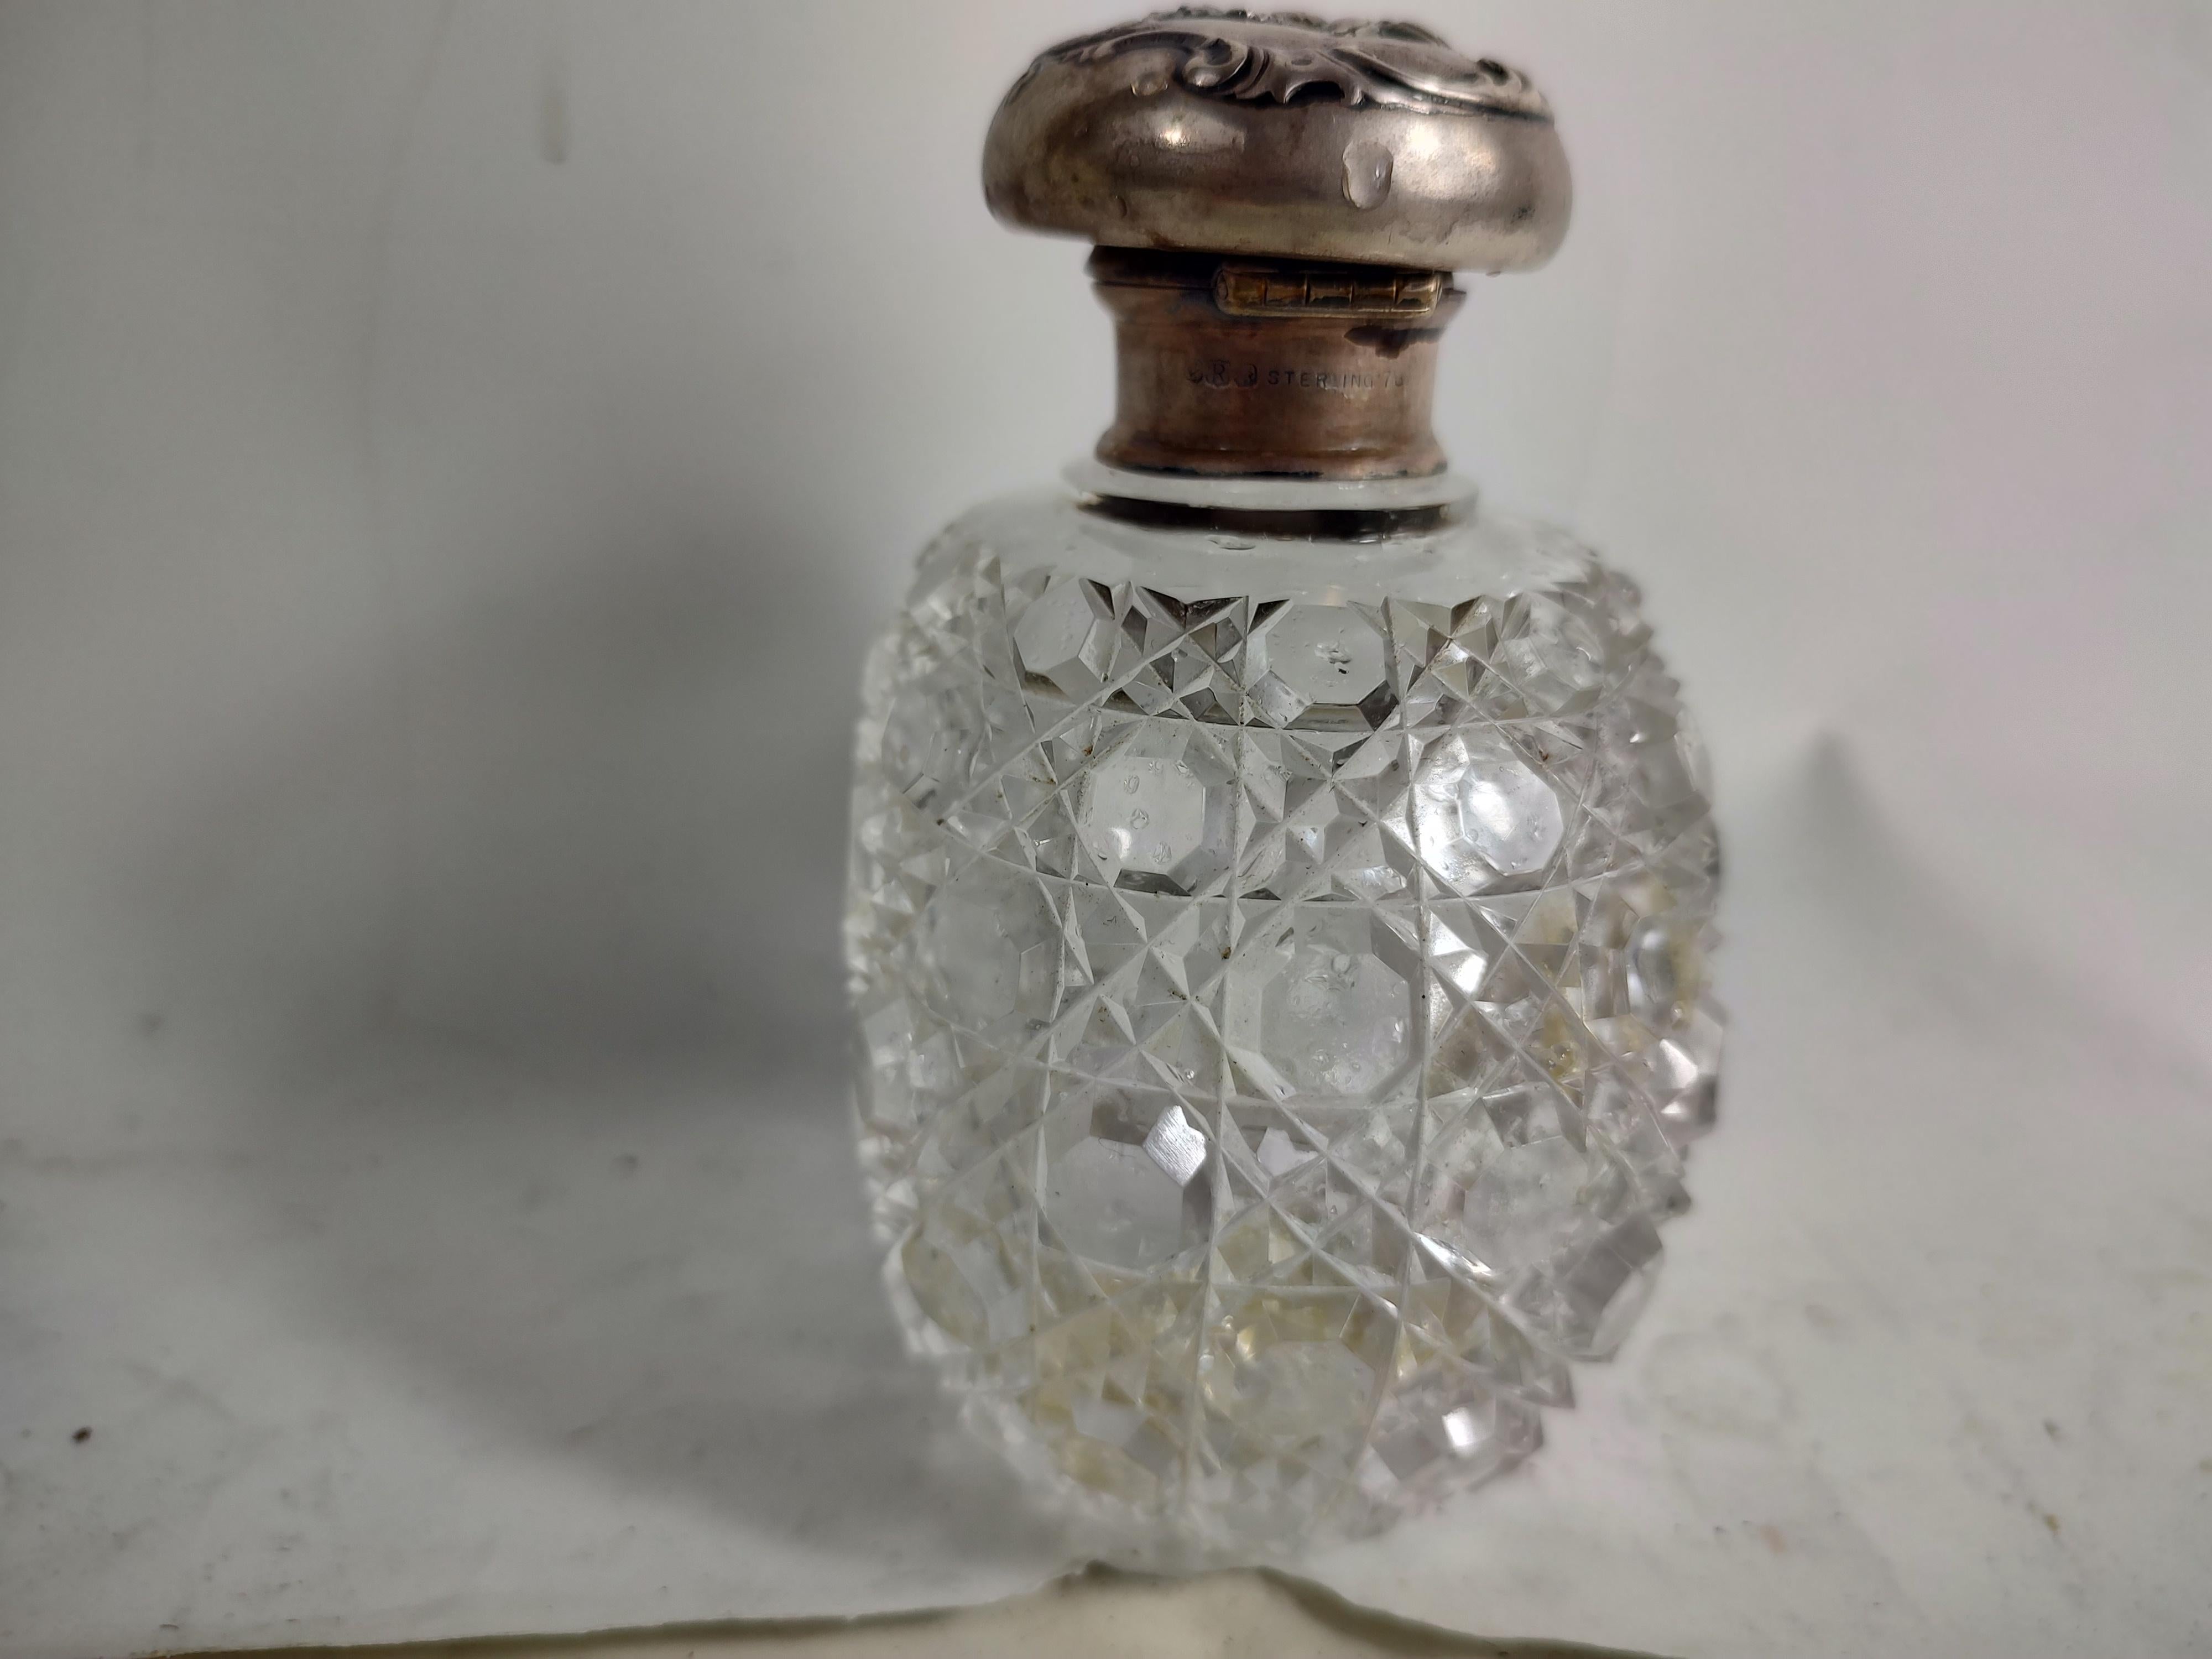 Edwardian Antique Brilliant Cut Glass Perfume Bottle with Sterling Silver Top Cap For Sale